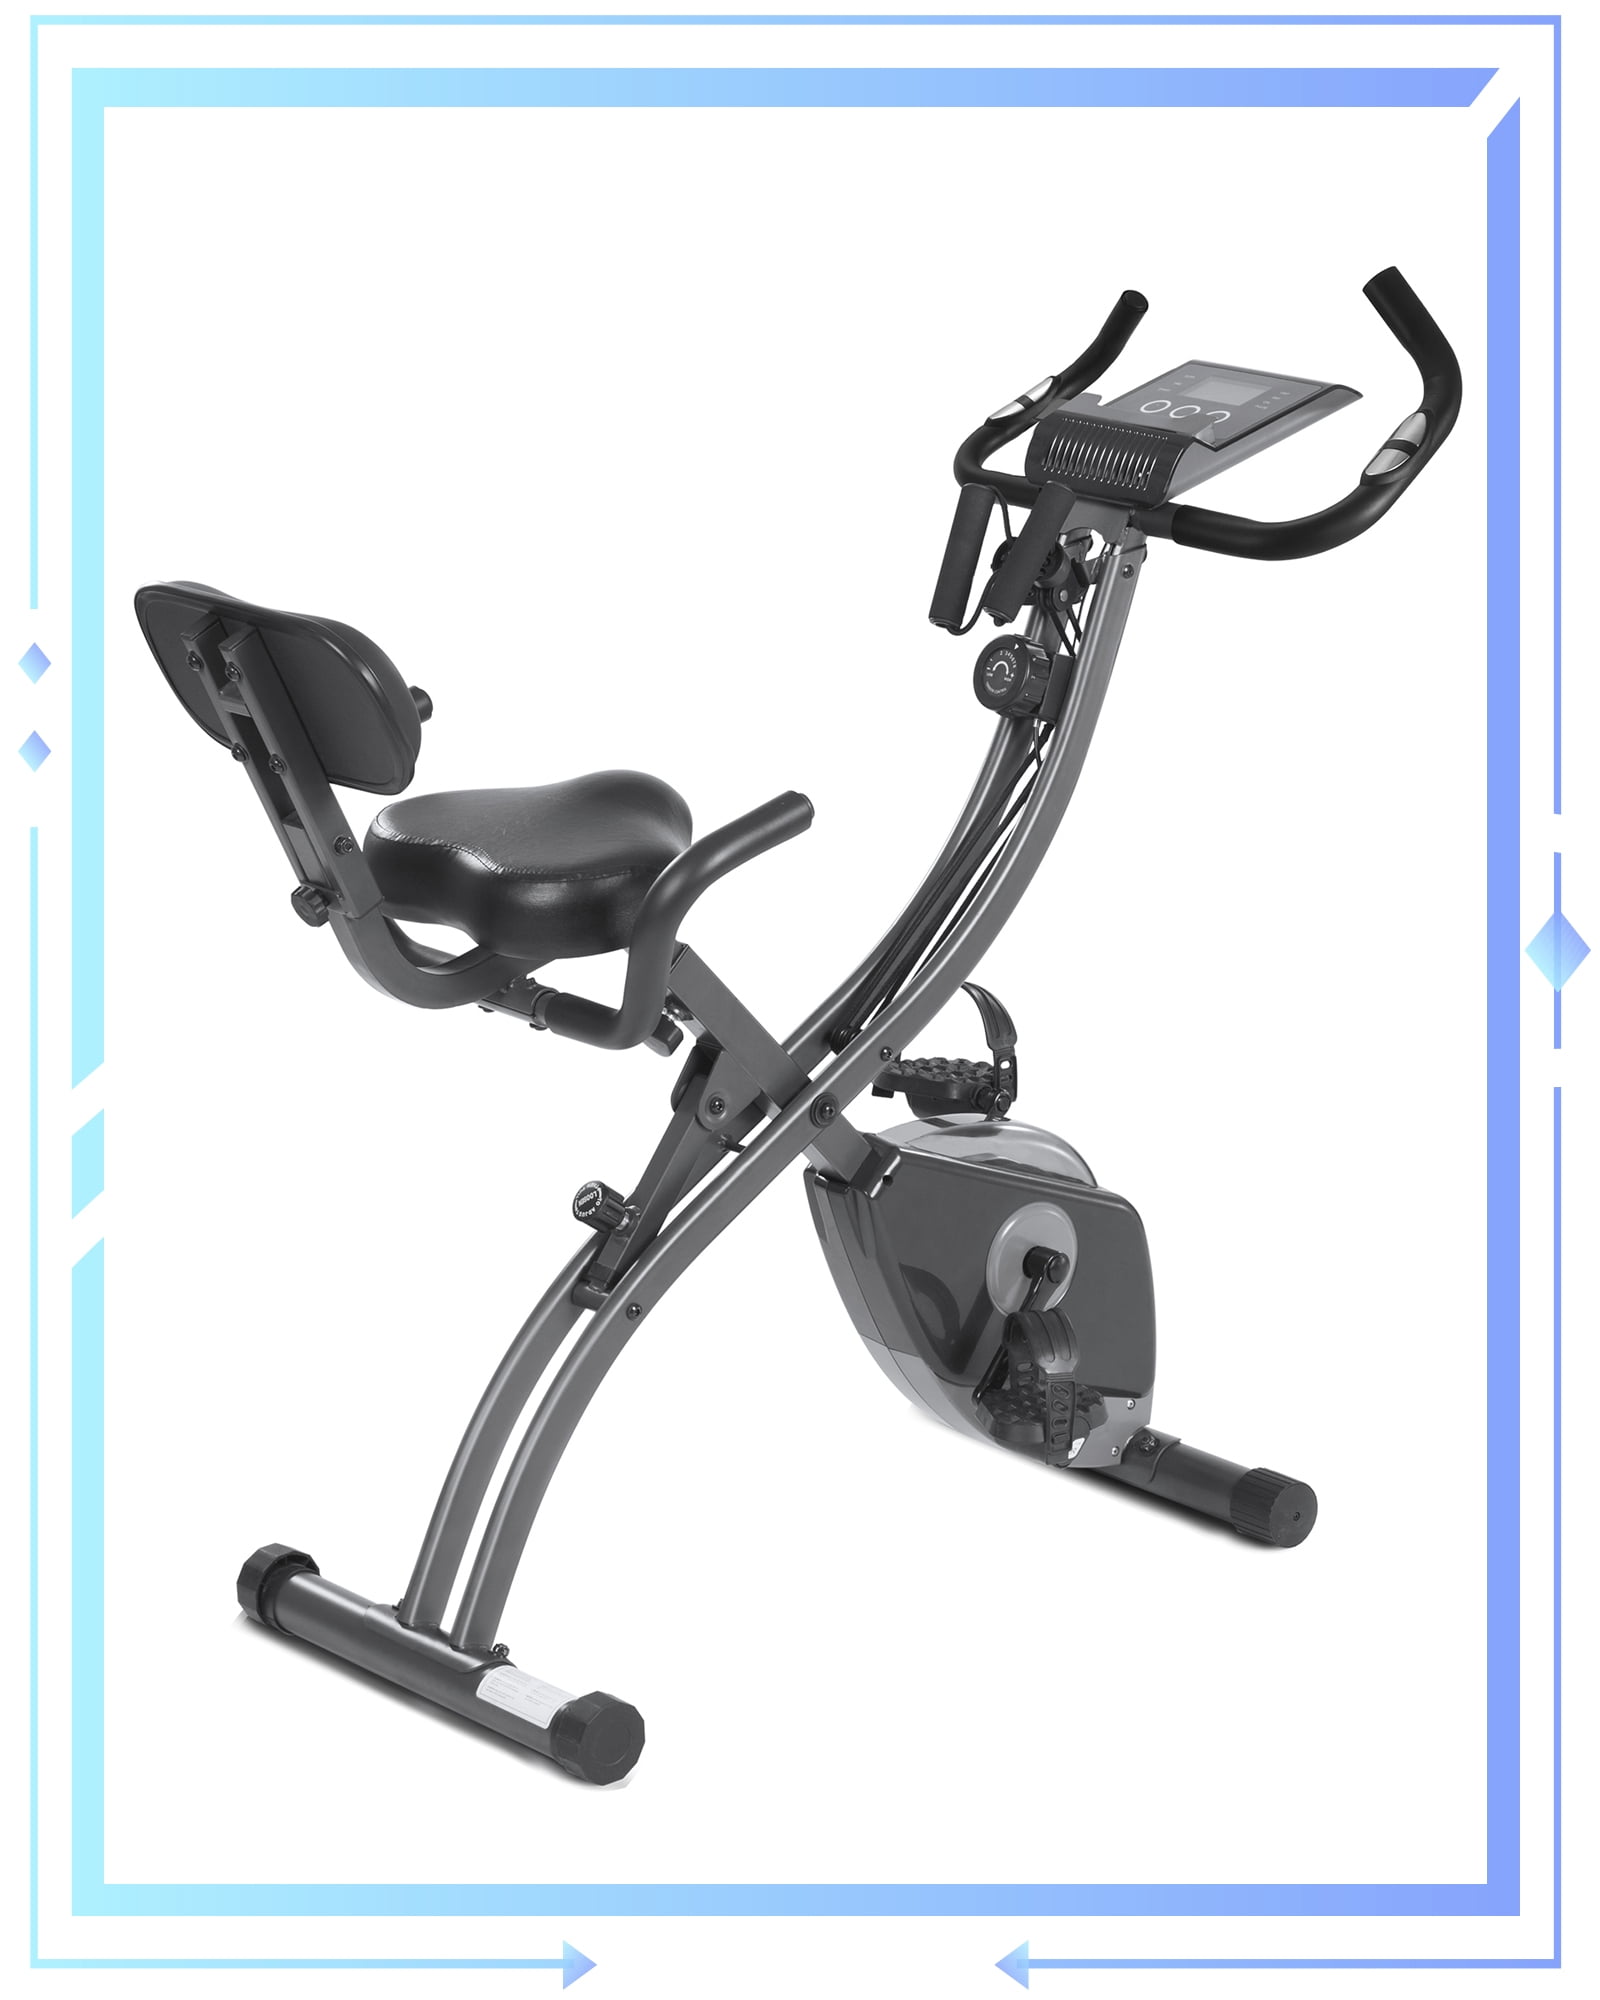 Folding Indoor Exercise Bike with Arm Resistance Bands and Heart Monitor Original As Seen On TV Slim Stationary Bike 